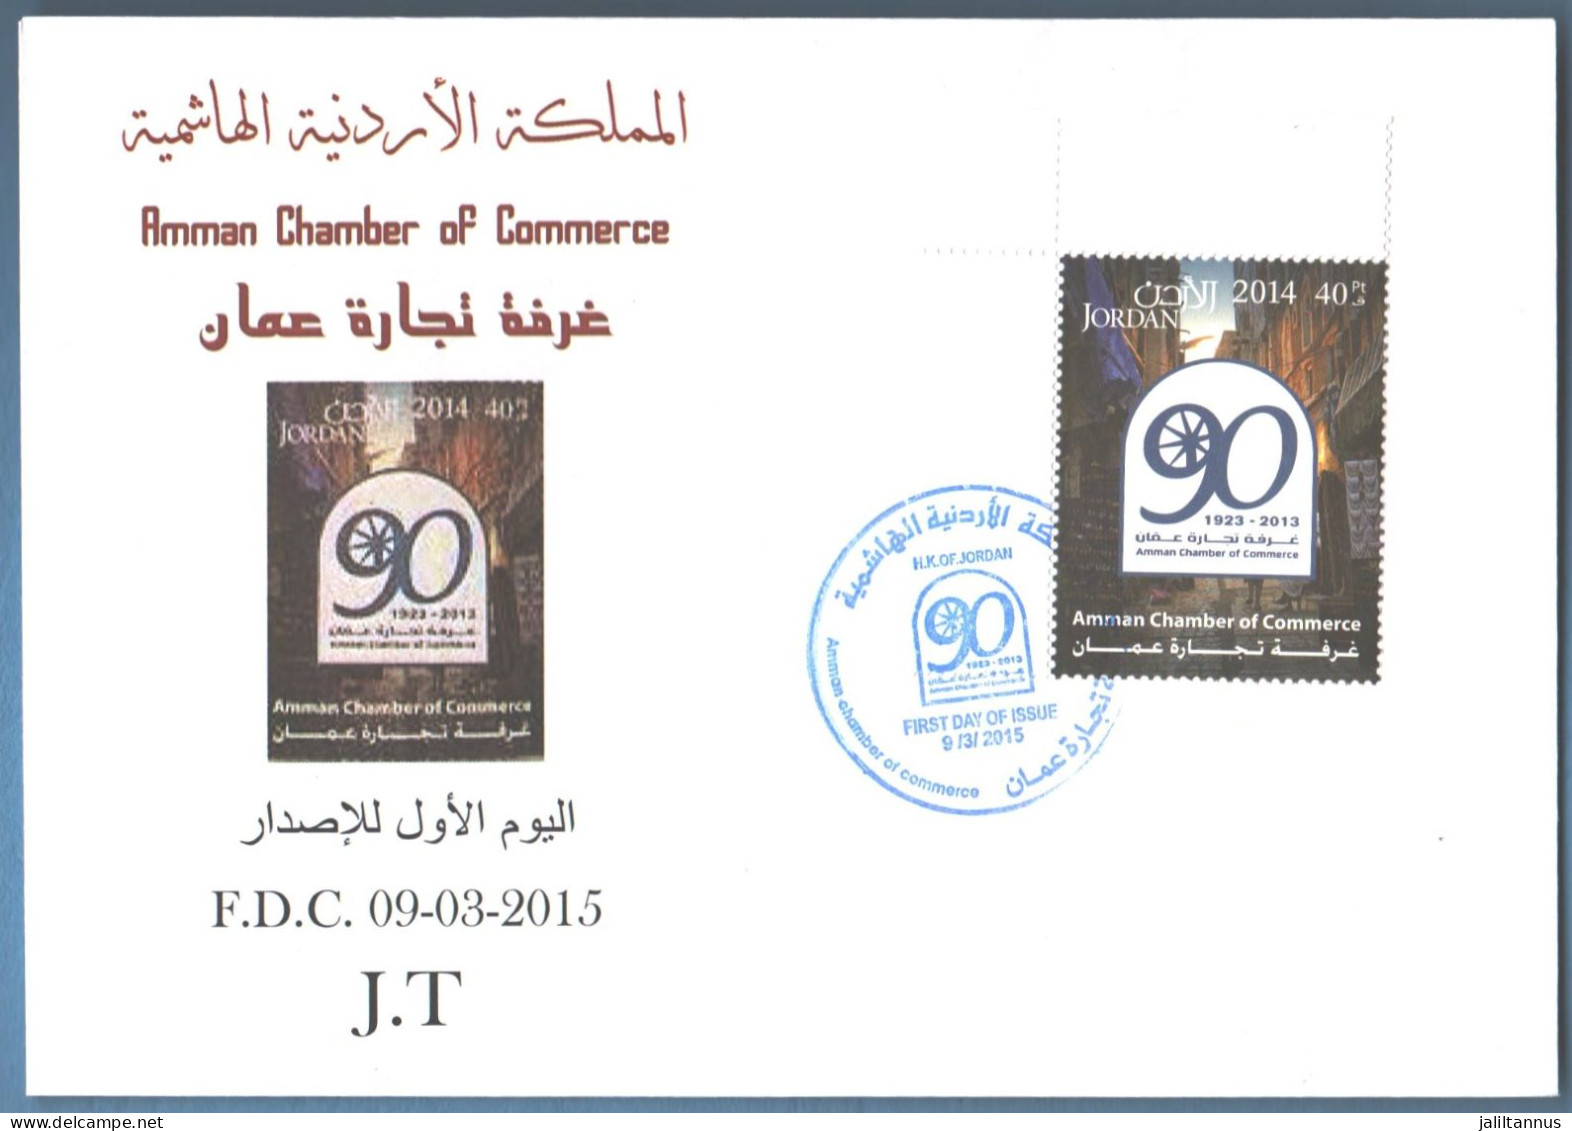 FDC Envelope AMMAN CHAMBER OF COMMERCE 2014 - Giordania